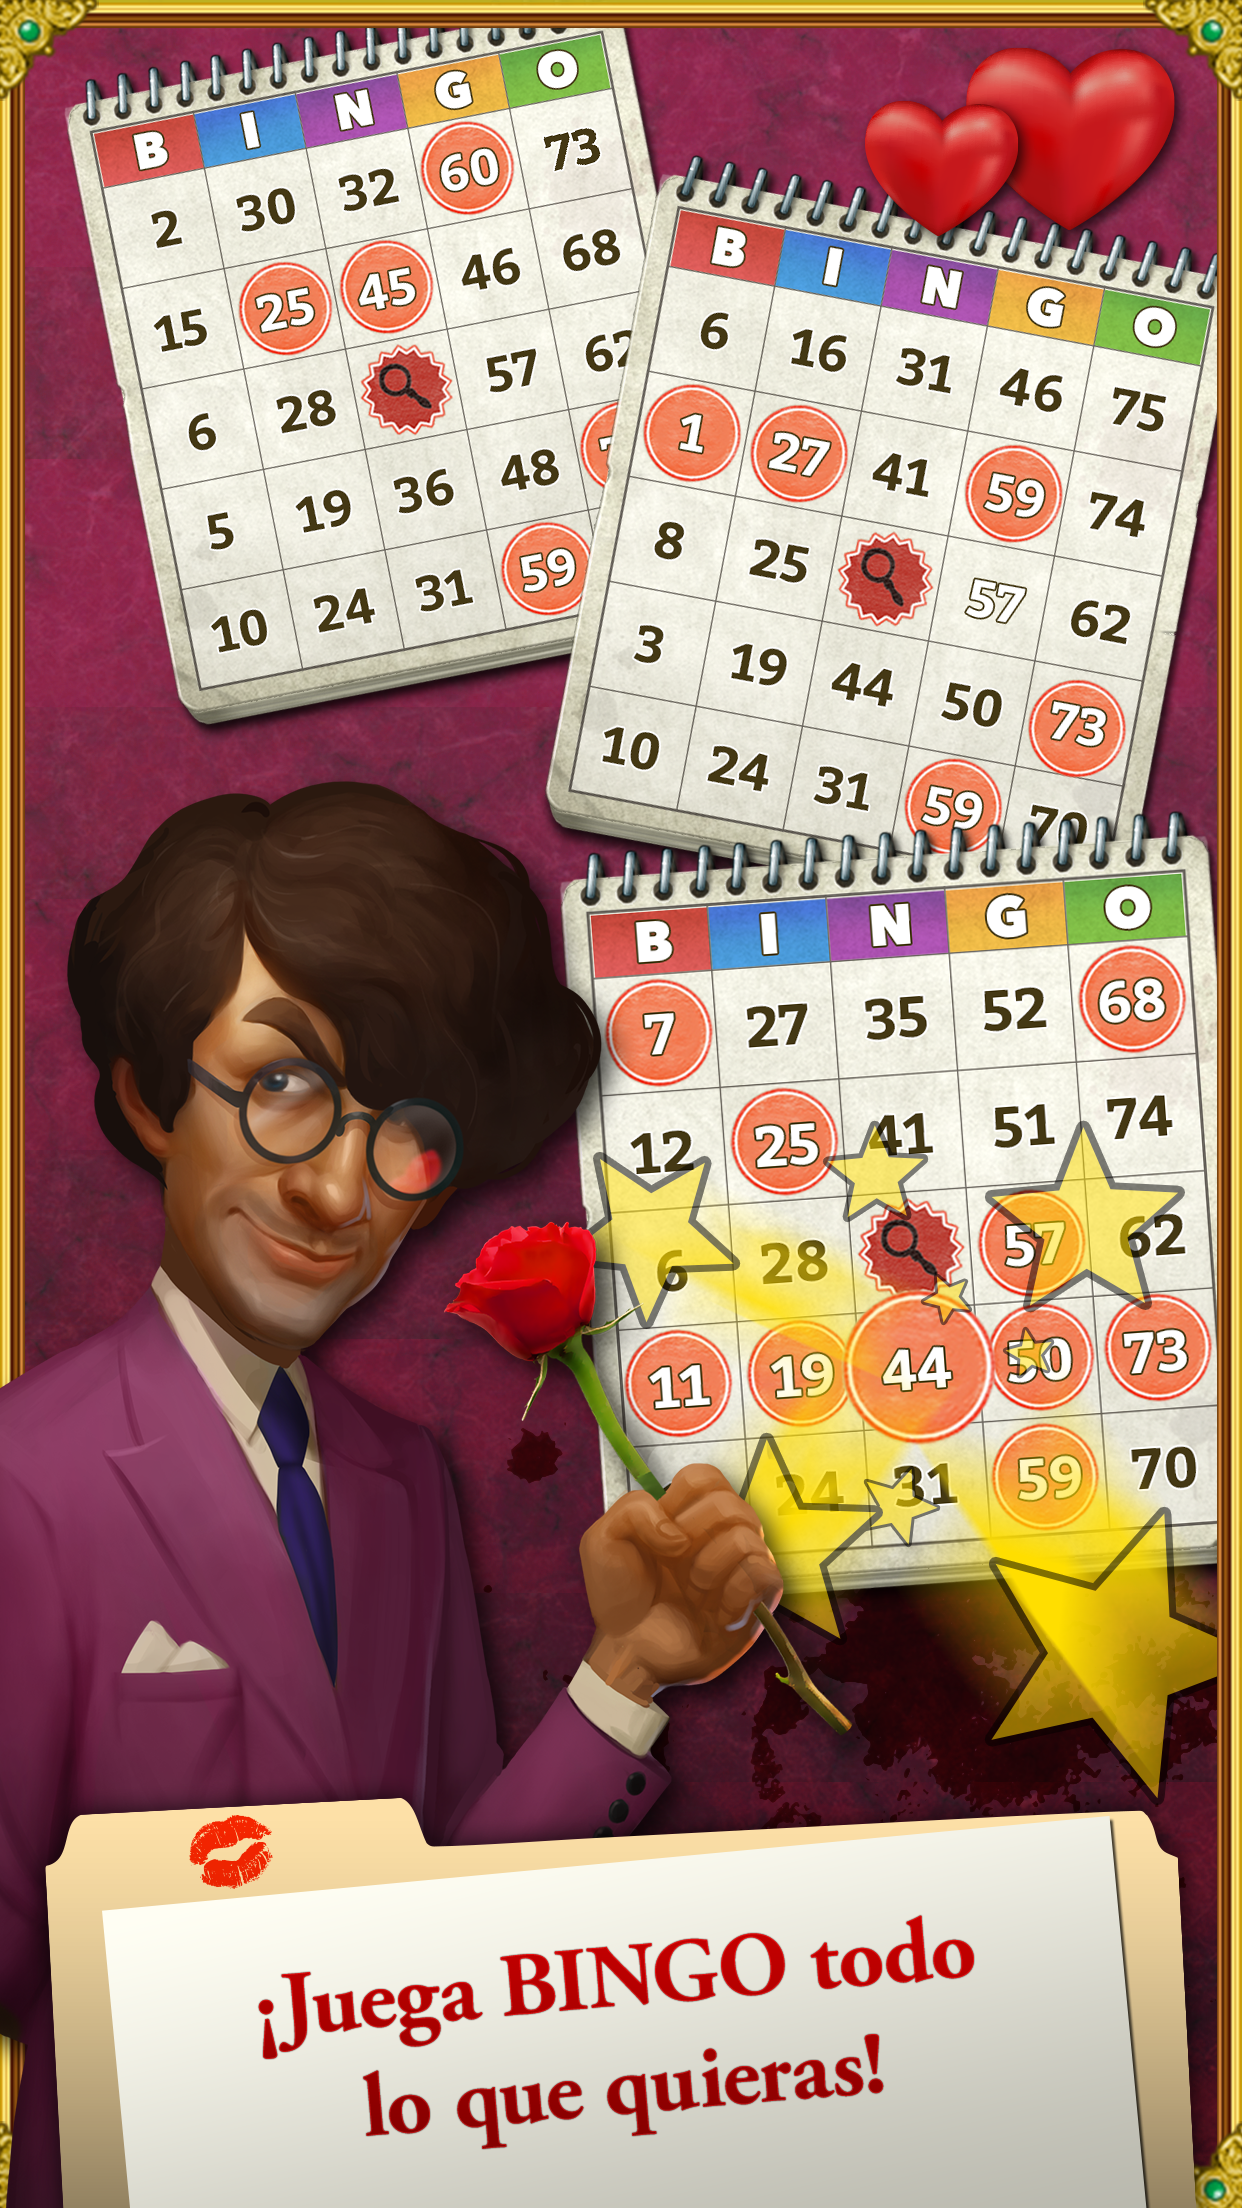 Android application CLUE Bingo: Valentines Day screenshort